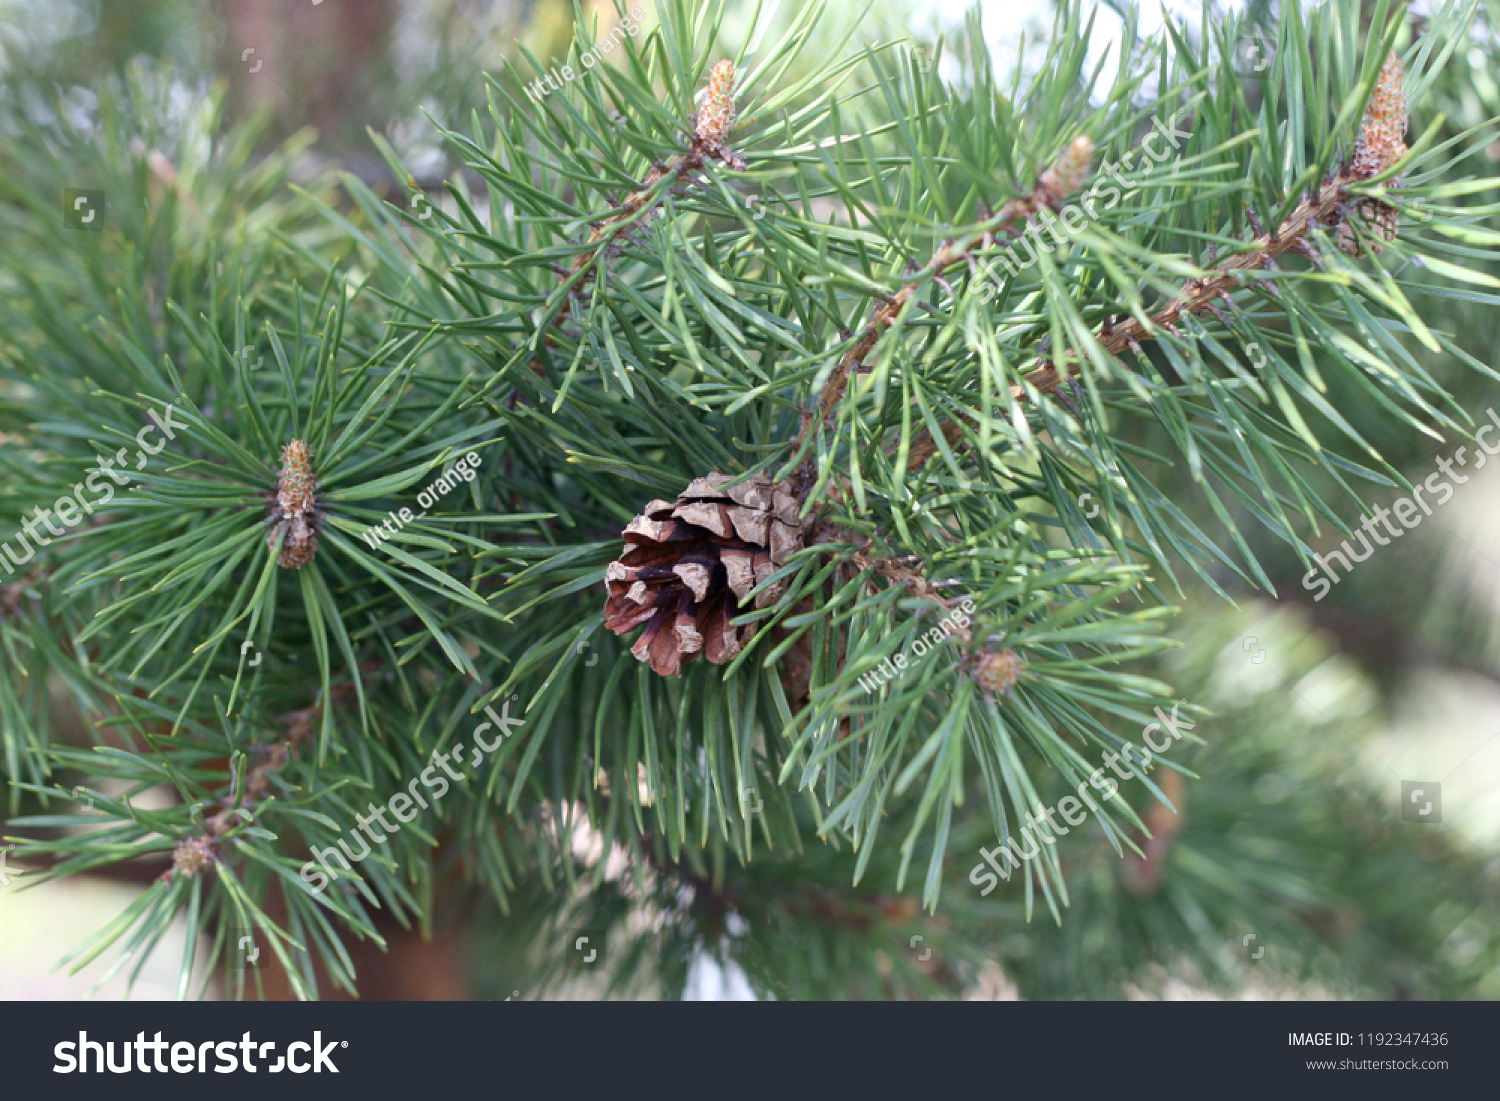 Pine cones on pine branches. Green needles #1192347436